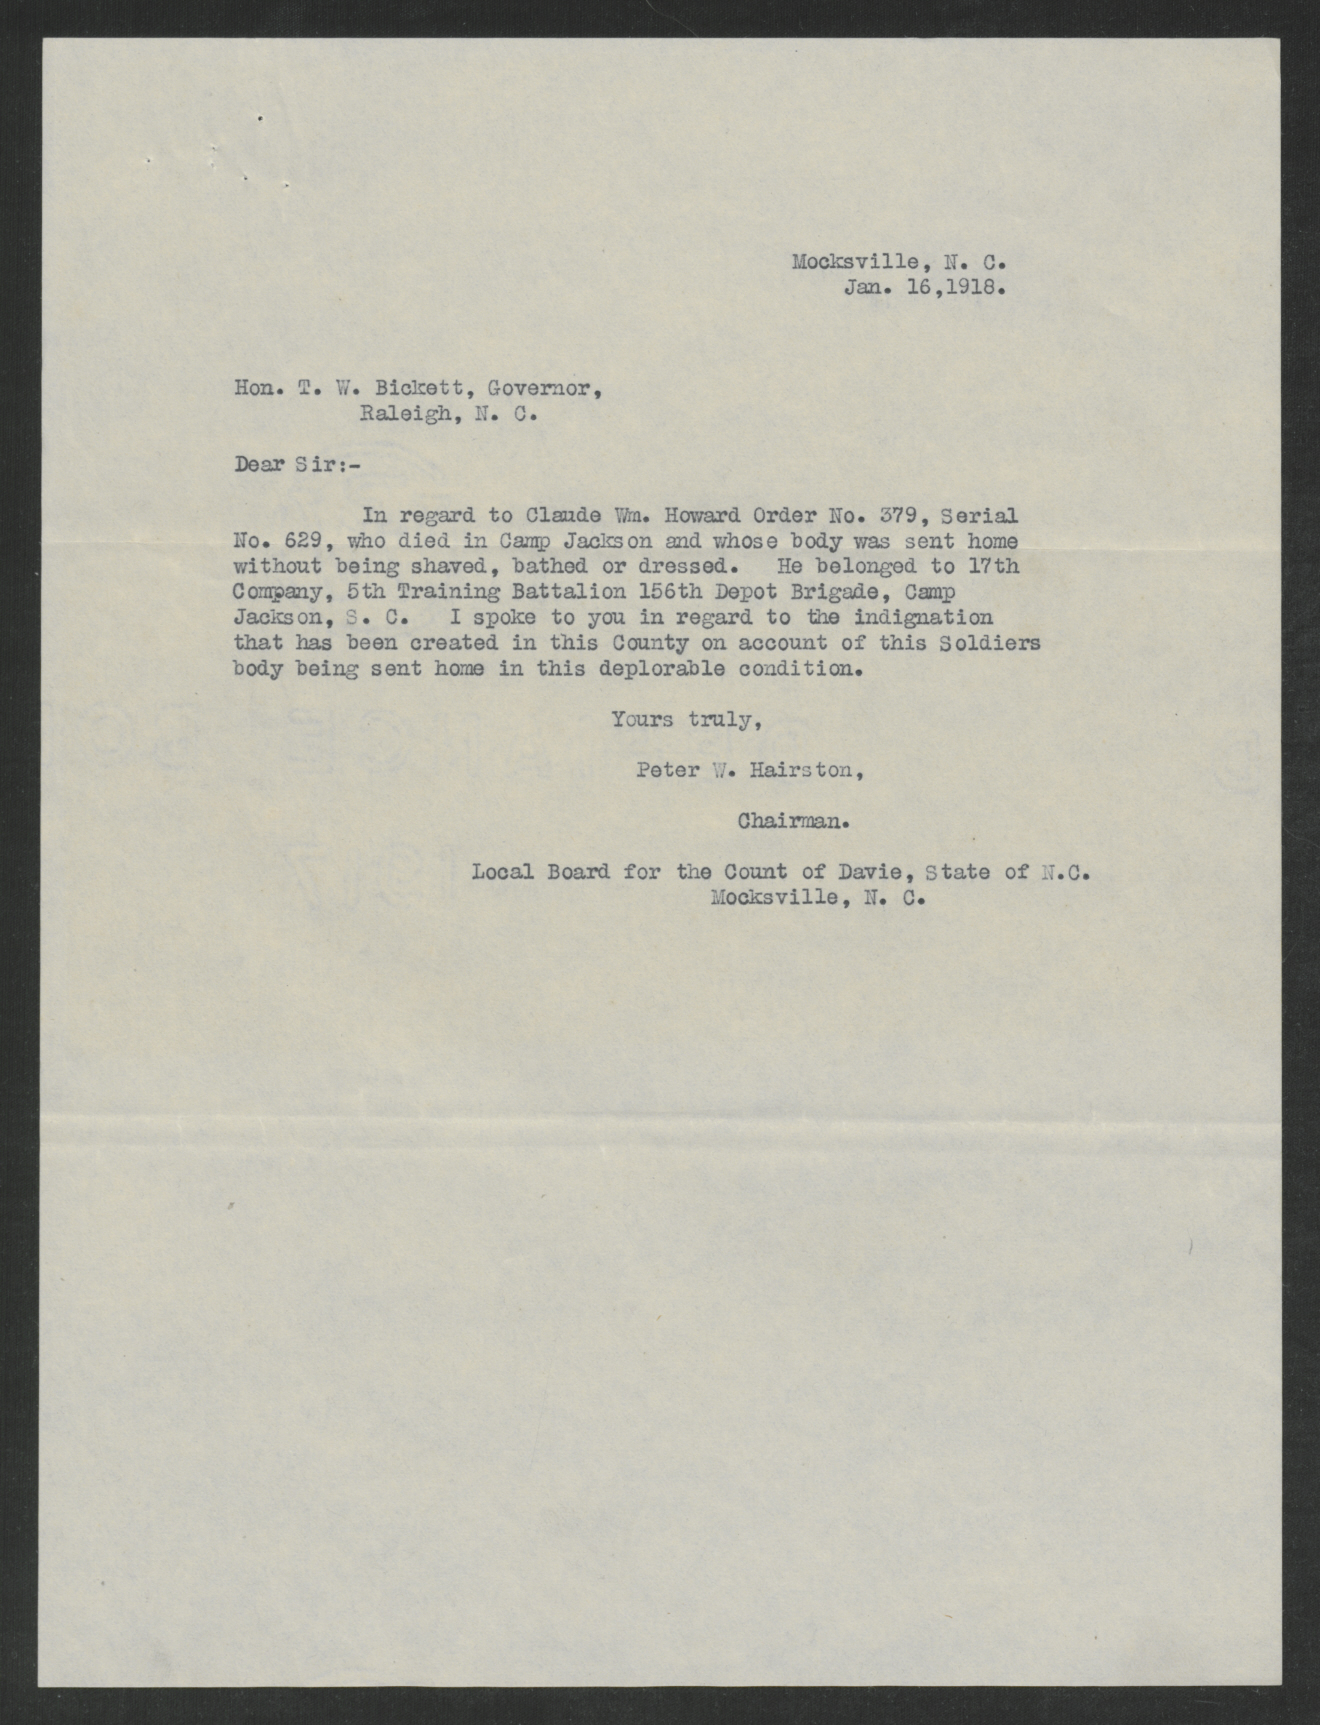 Letter from Peter W. Hairston to Thomas W. Bickett, January 16, 1918